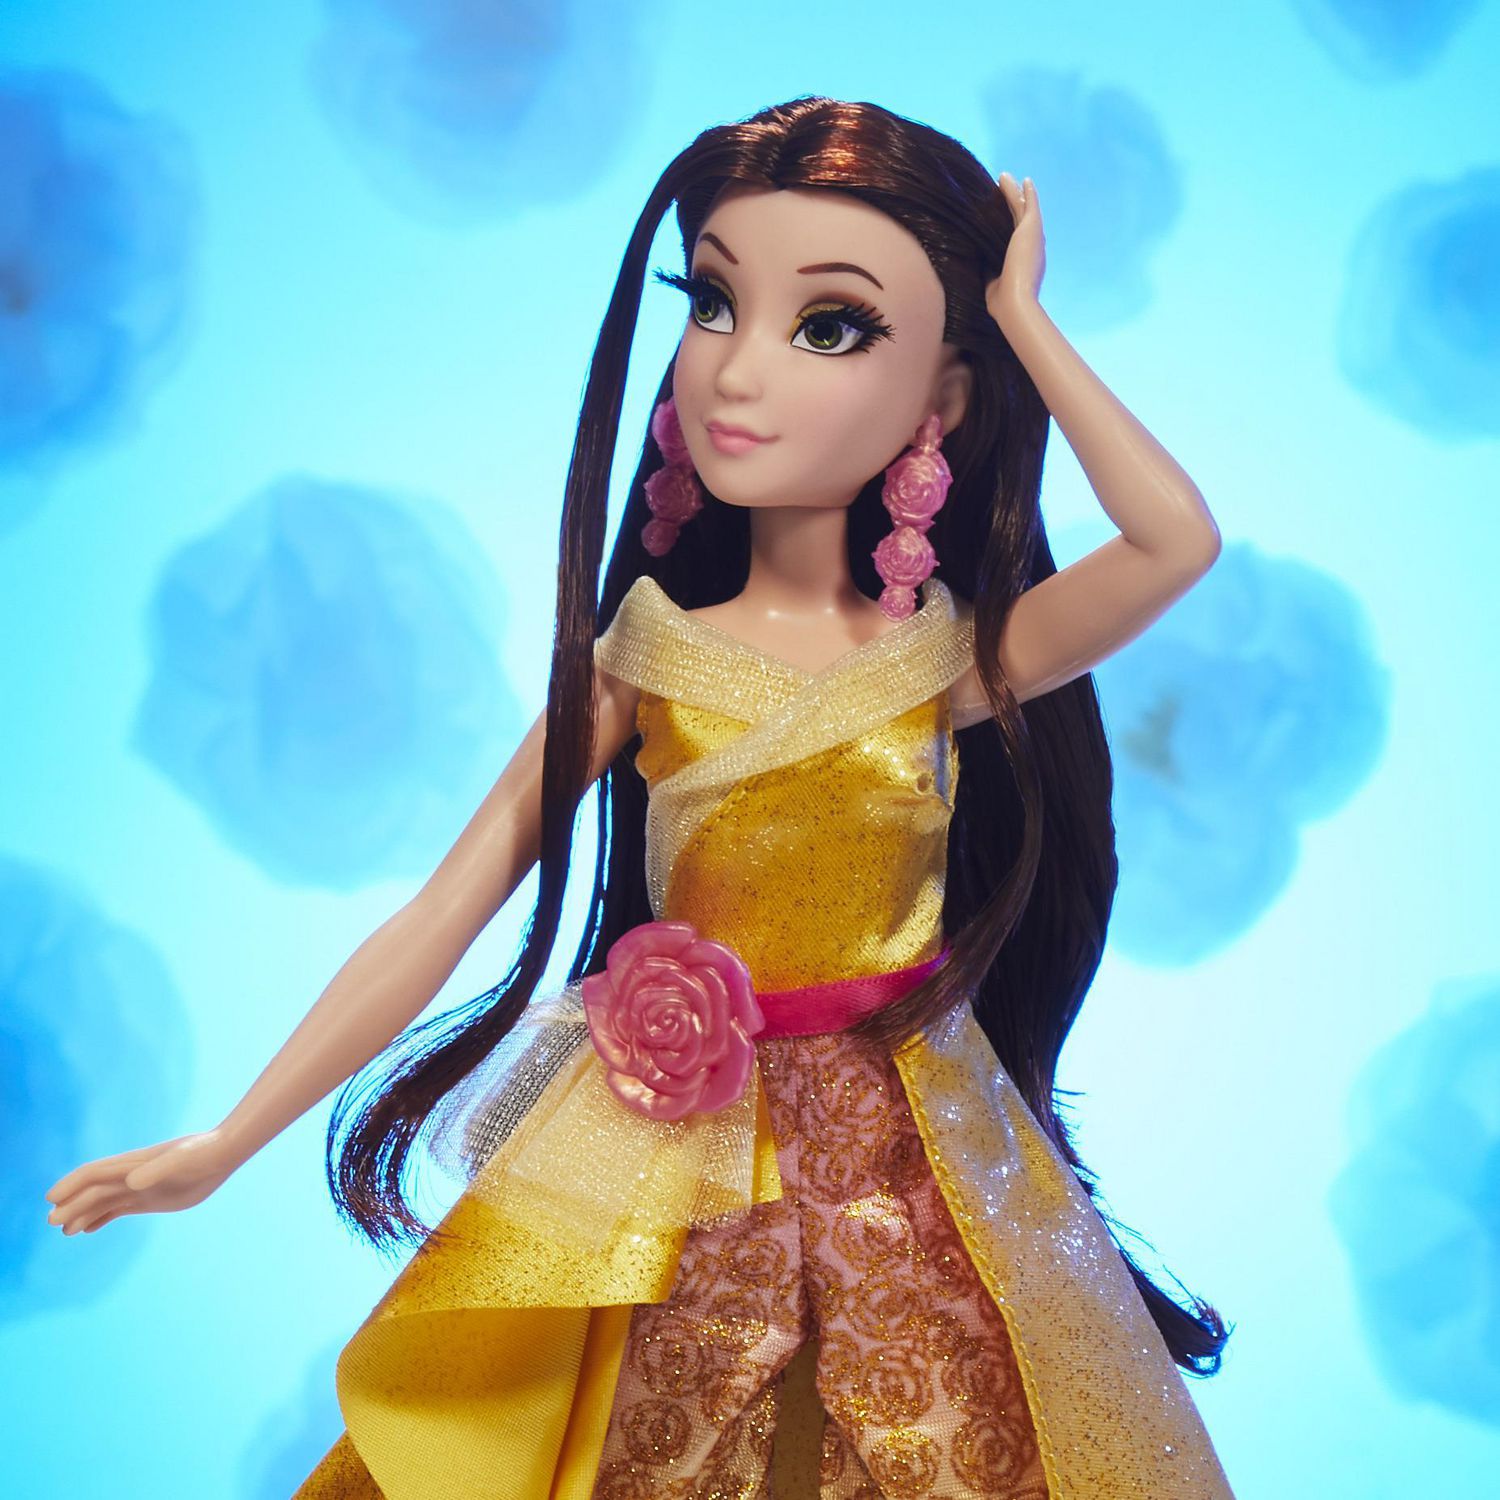 Disney Princess Style Series 08 Belle, Contemporary Style Fashion